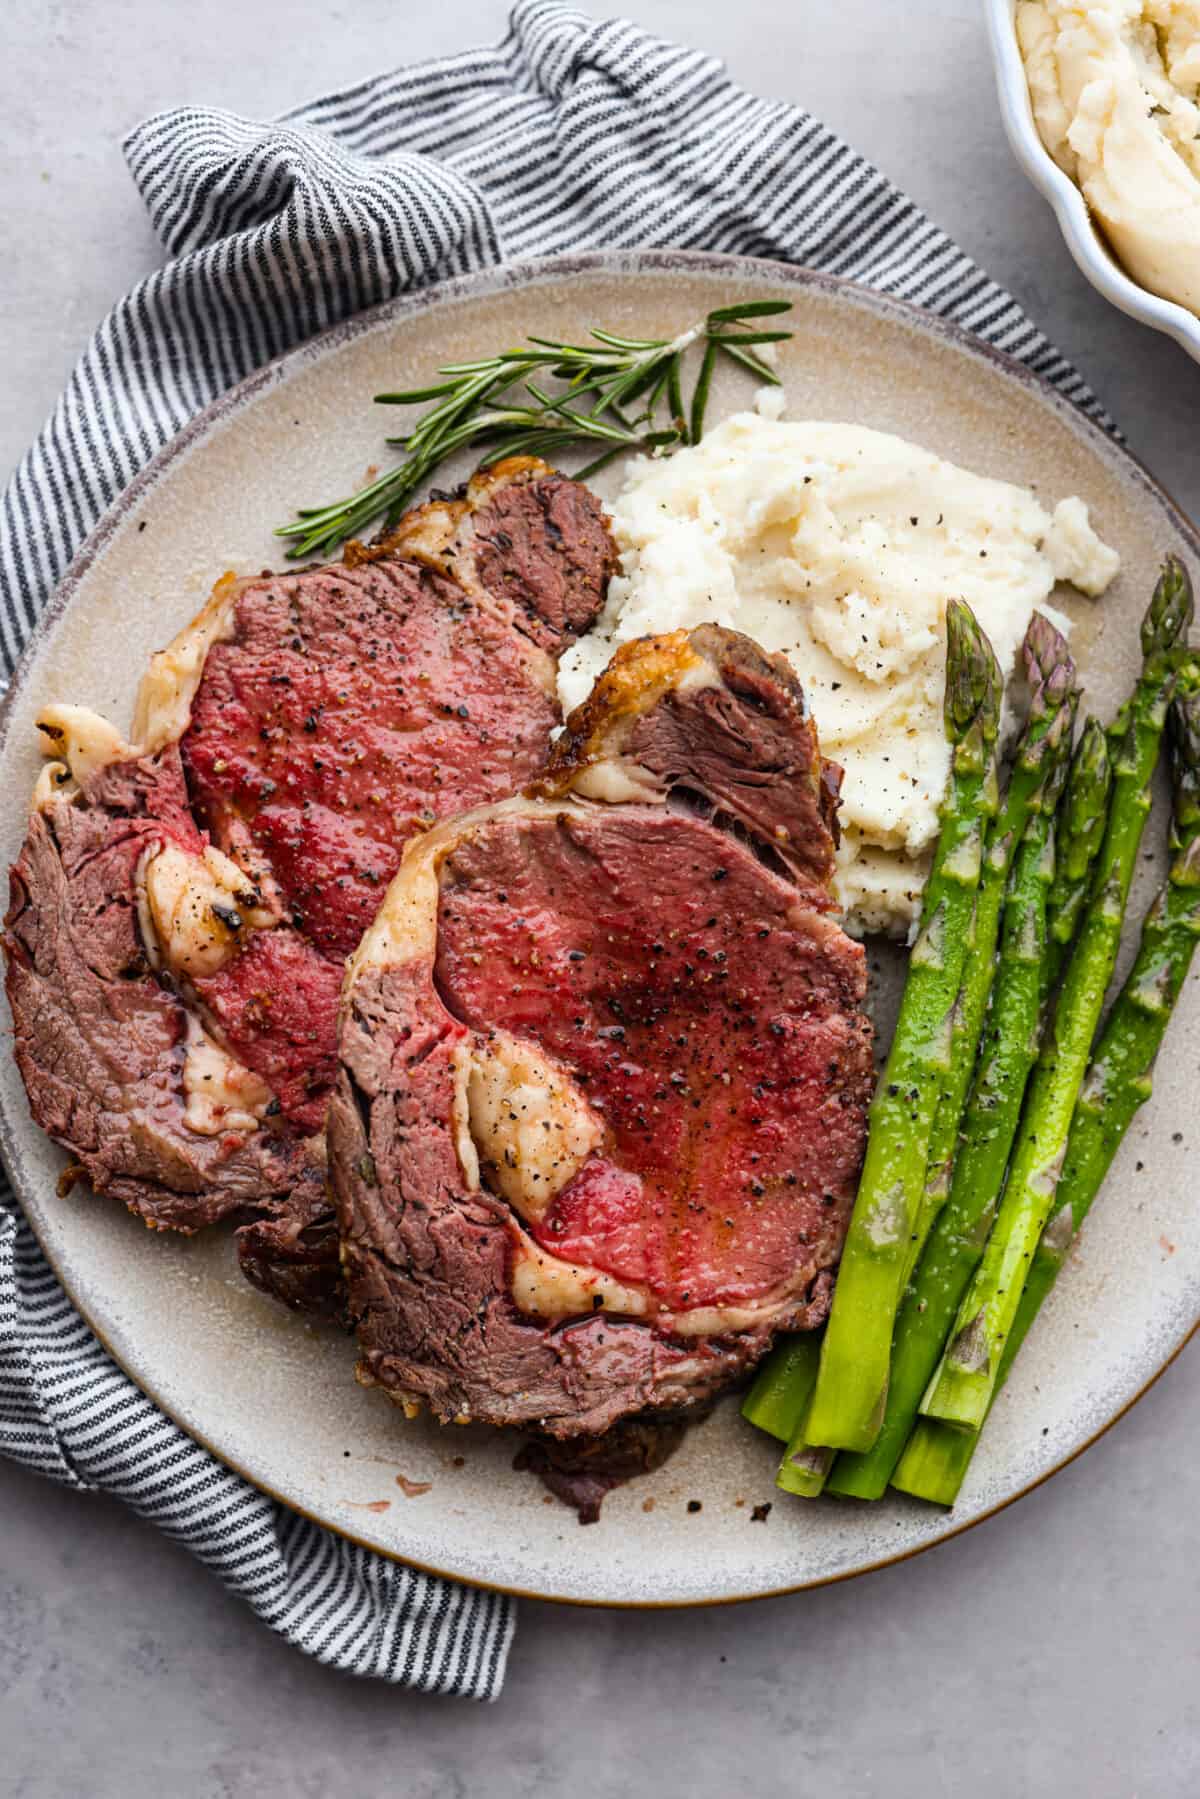 Top view of sliced ribeye roast on a large plate with mashed potatoes and asparagus on the side.